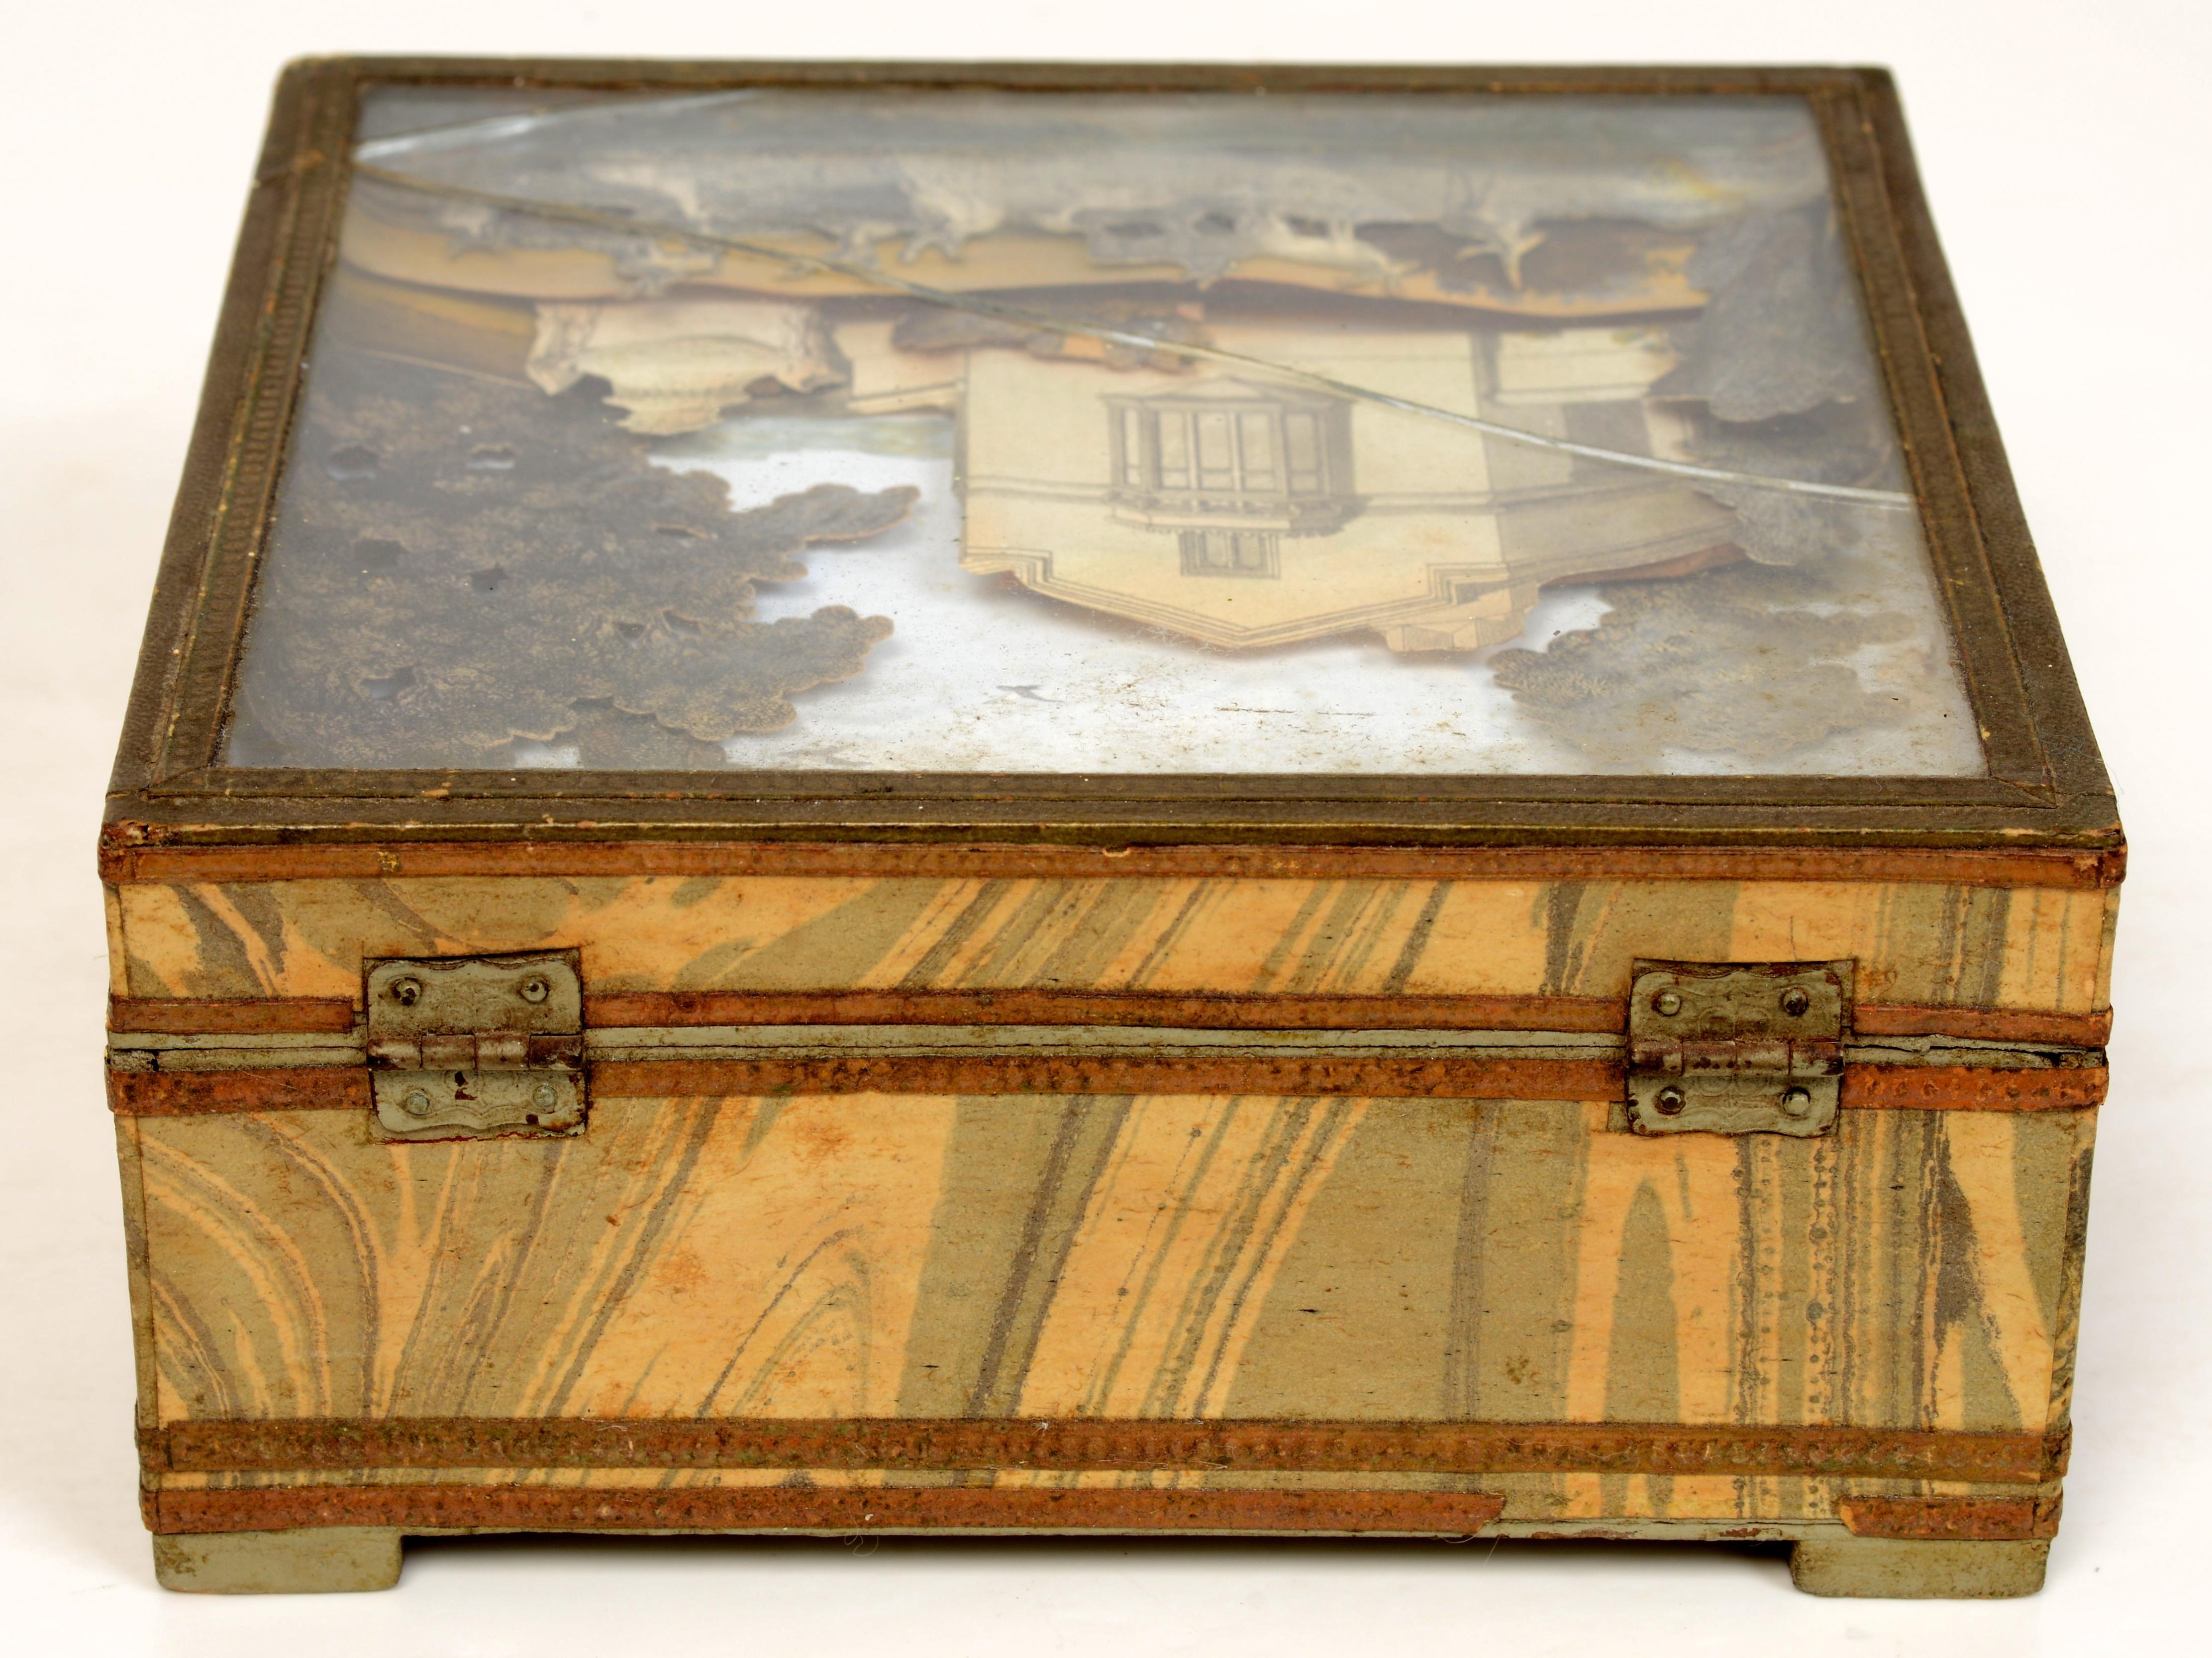 French 19th c Paper Covered Box With Neo-Classical Diorama Under the Glass Top In Fair Condition For Sale In valatie, NY